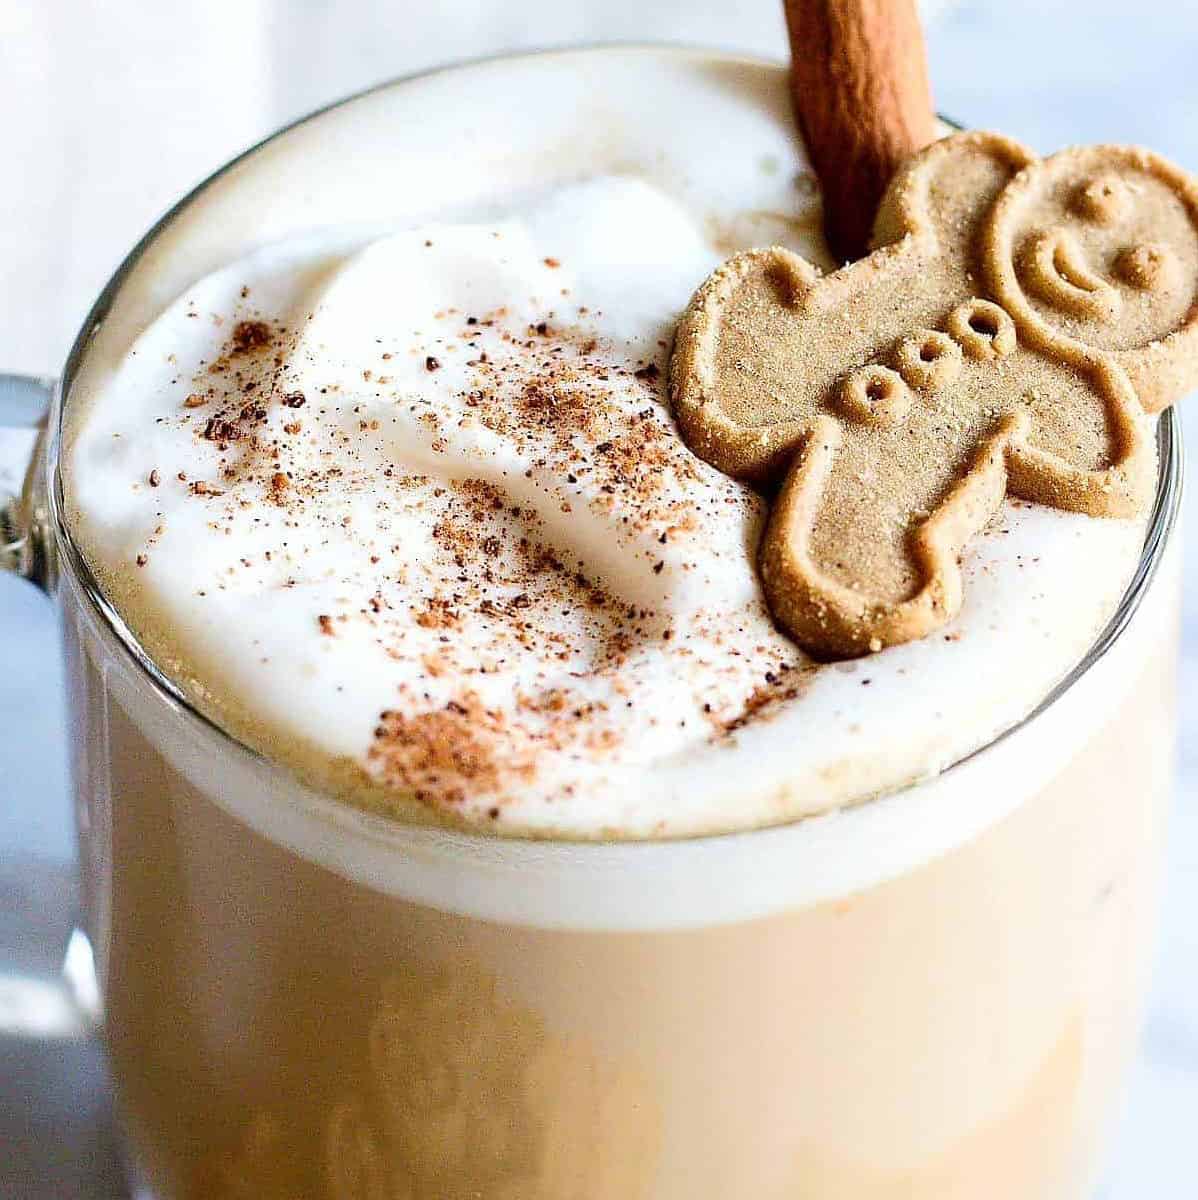  One sip of this latte and you'll feel like you're sitting by the fireplace.